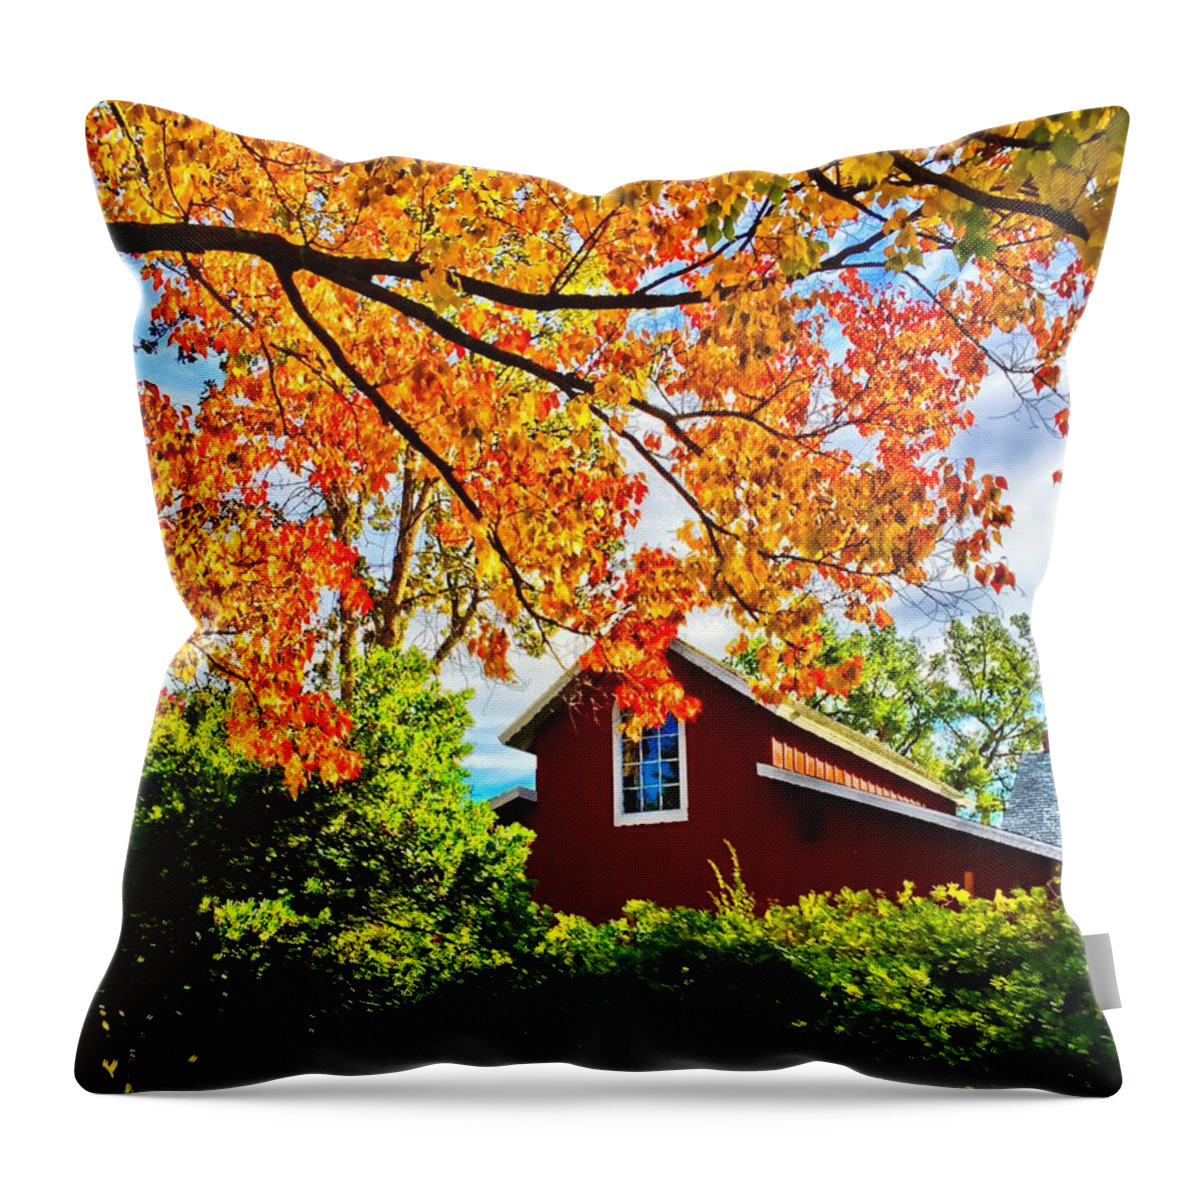 Barn Throw Pillow featuring the photograph The Red Barn by Brad Hodges